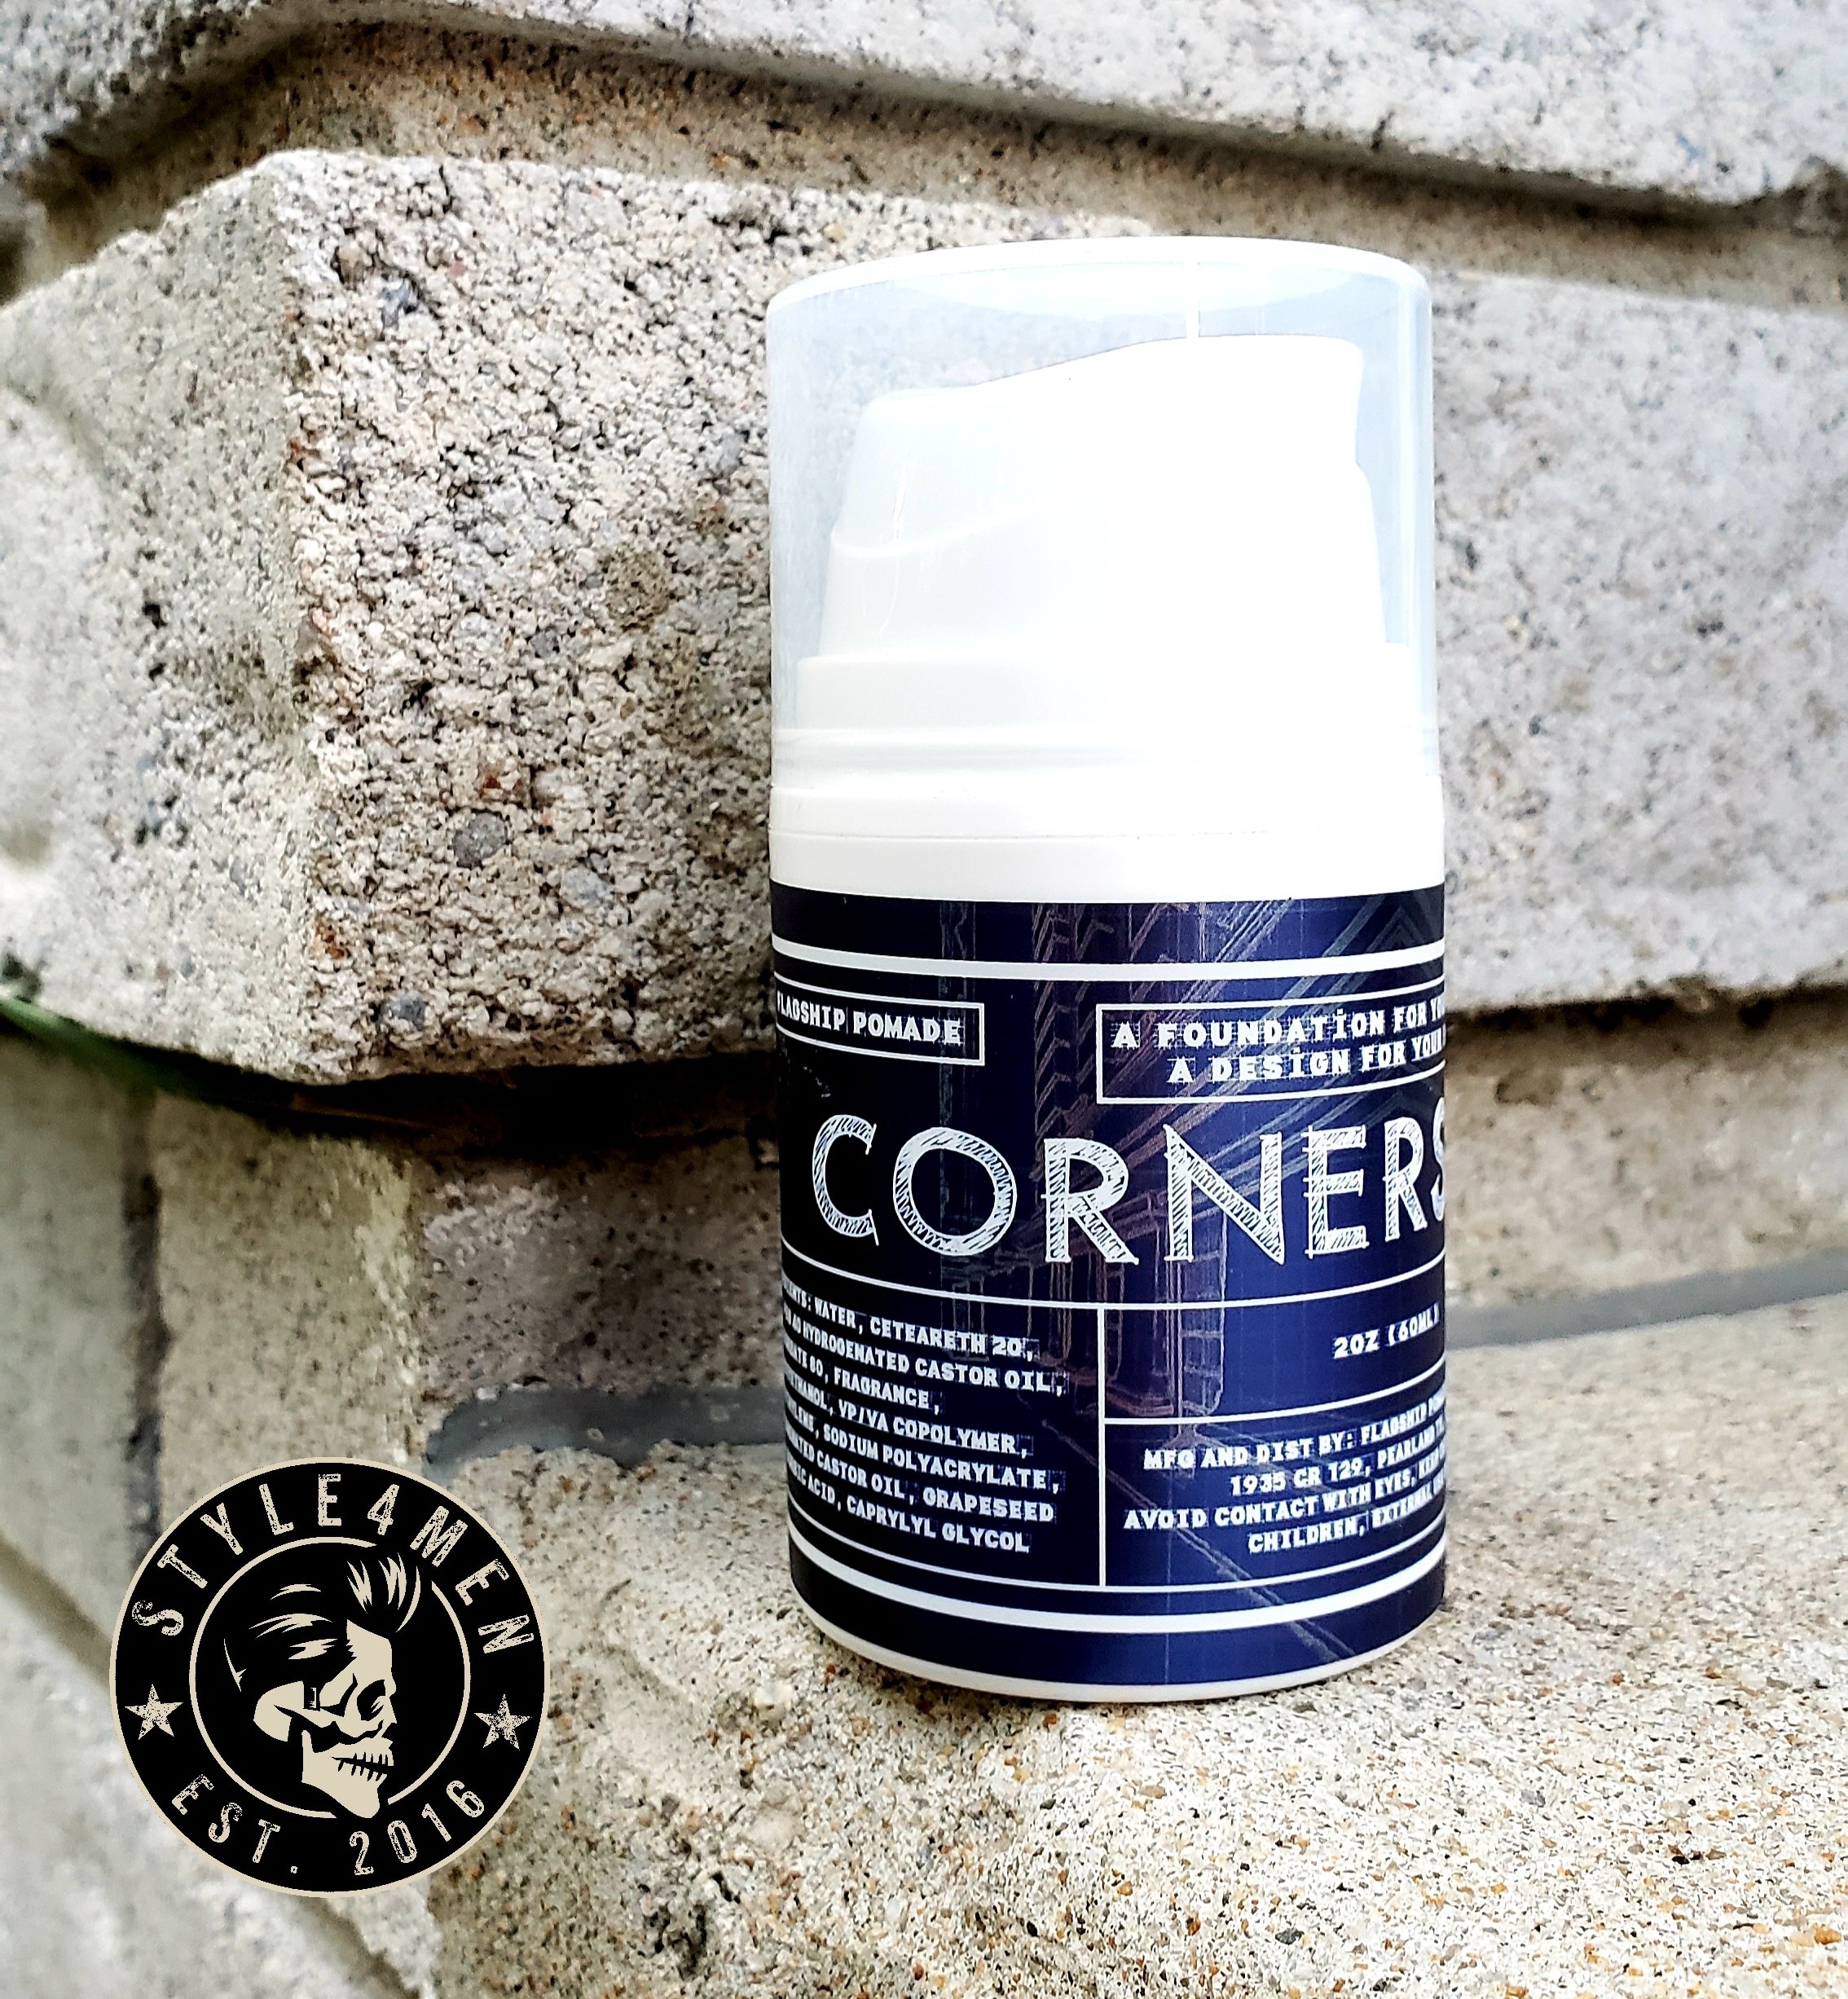 CORNERSTONE Pre-Styling gel by Flagship Pomade and Modernman TV